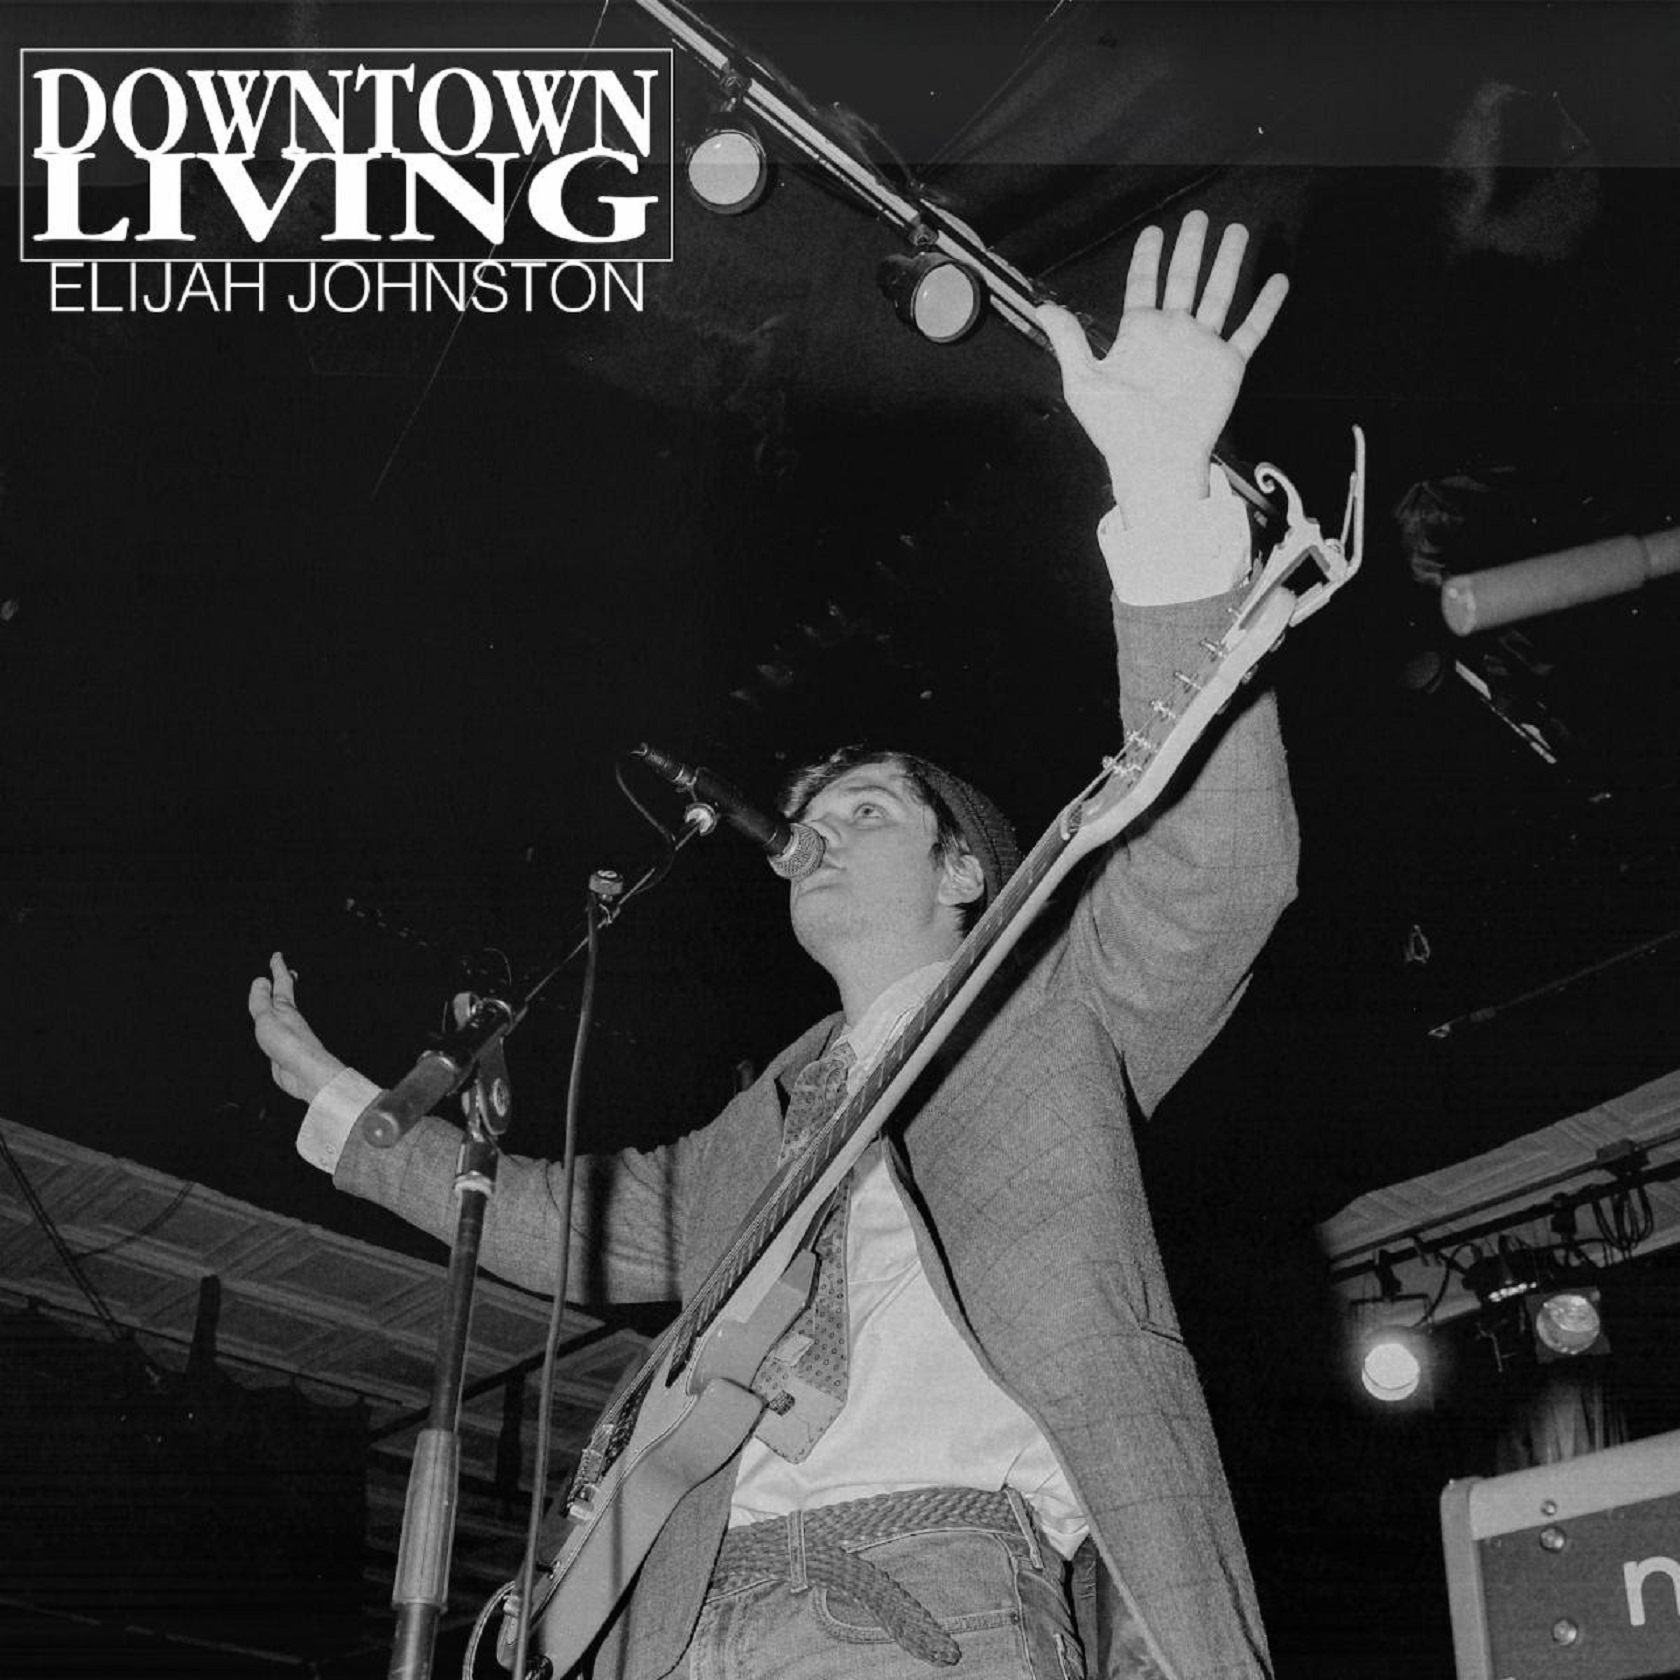 ELIJAH JOHNSTON RECKONS WITH “DOWNTOWN LIVING” ON SIZZLING NEW SINGLE